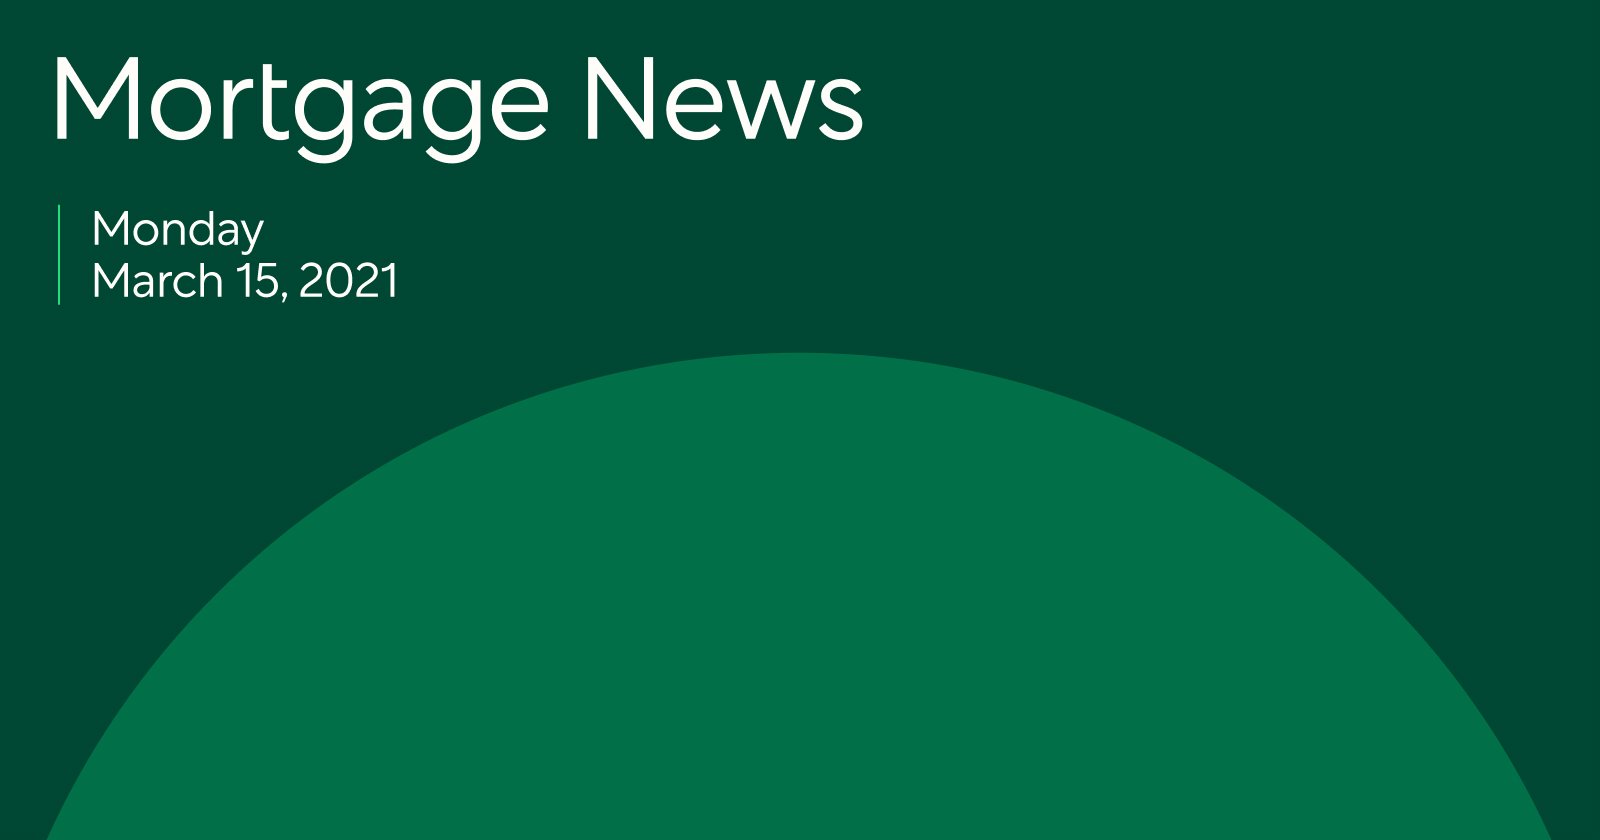 Mortgage News 3/15/2021: Home Equity Gains Are Averaging 26K Per Owner